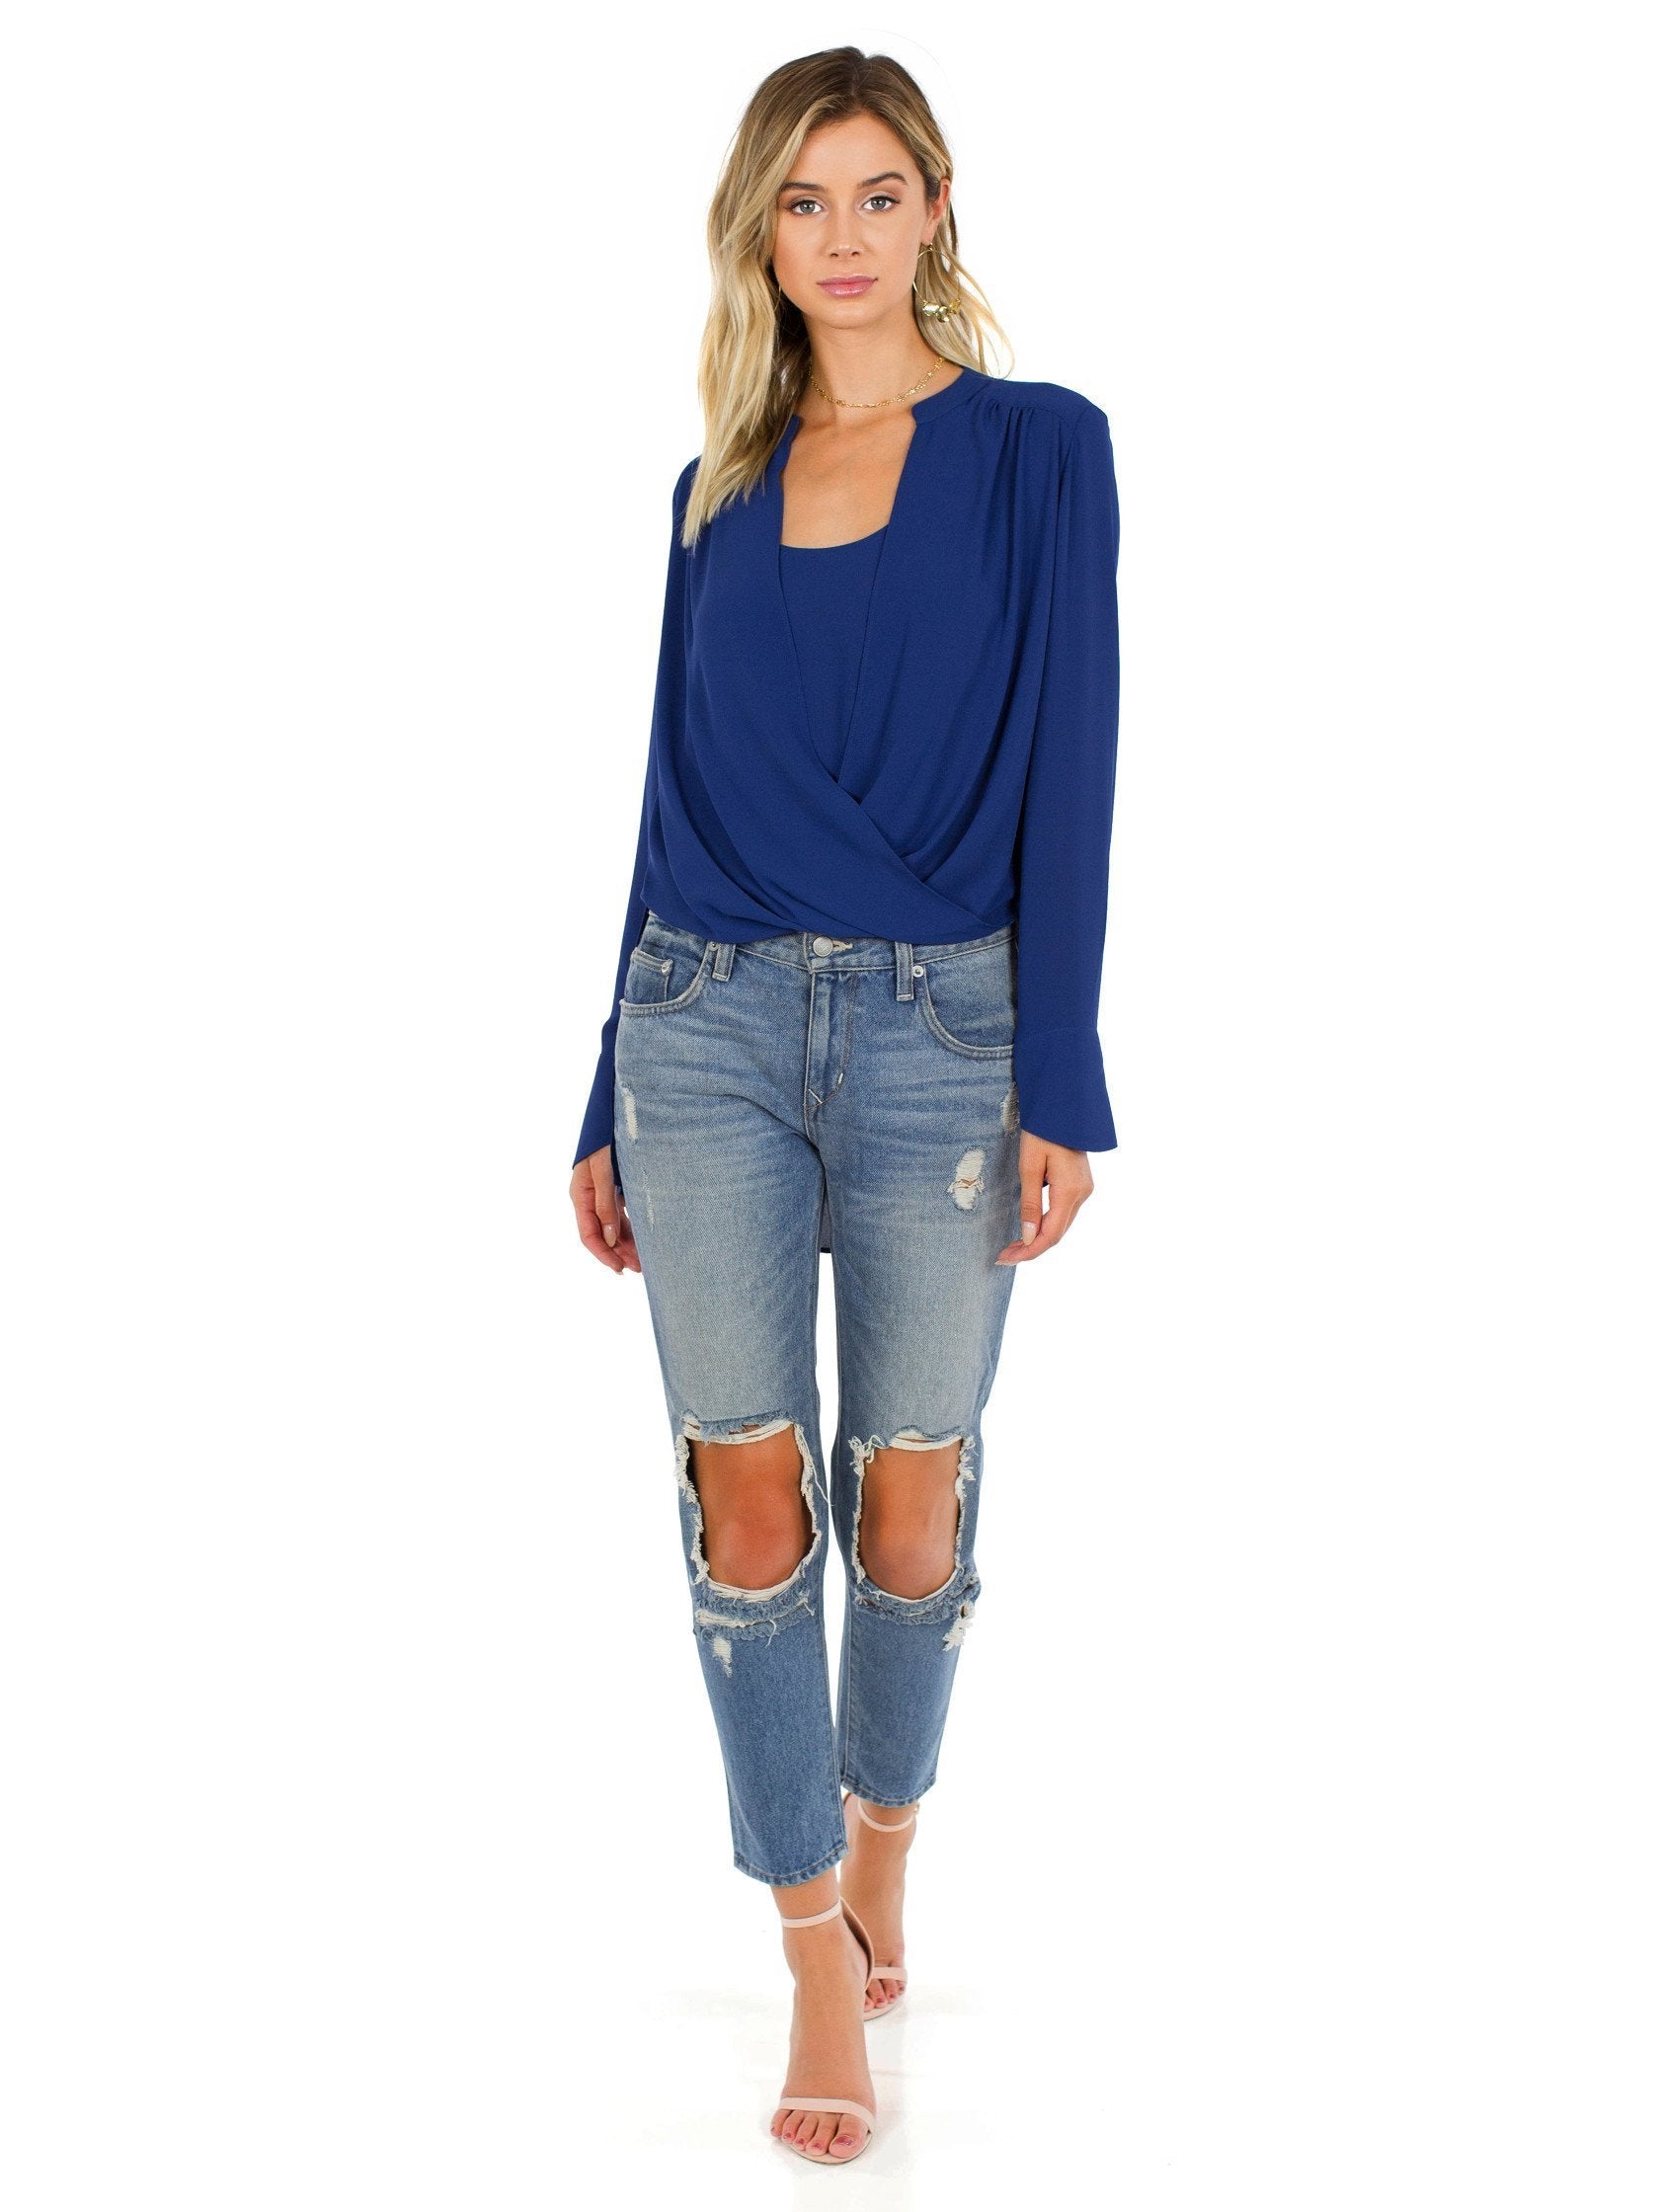 Girl wearing a top rental from BCBGMAXAZRIA called Jaklyn Draped-front Blouse